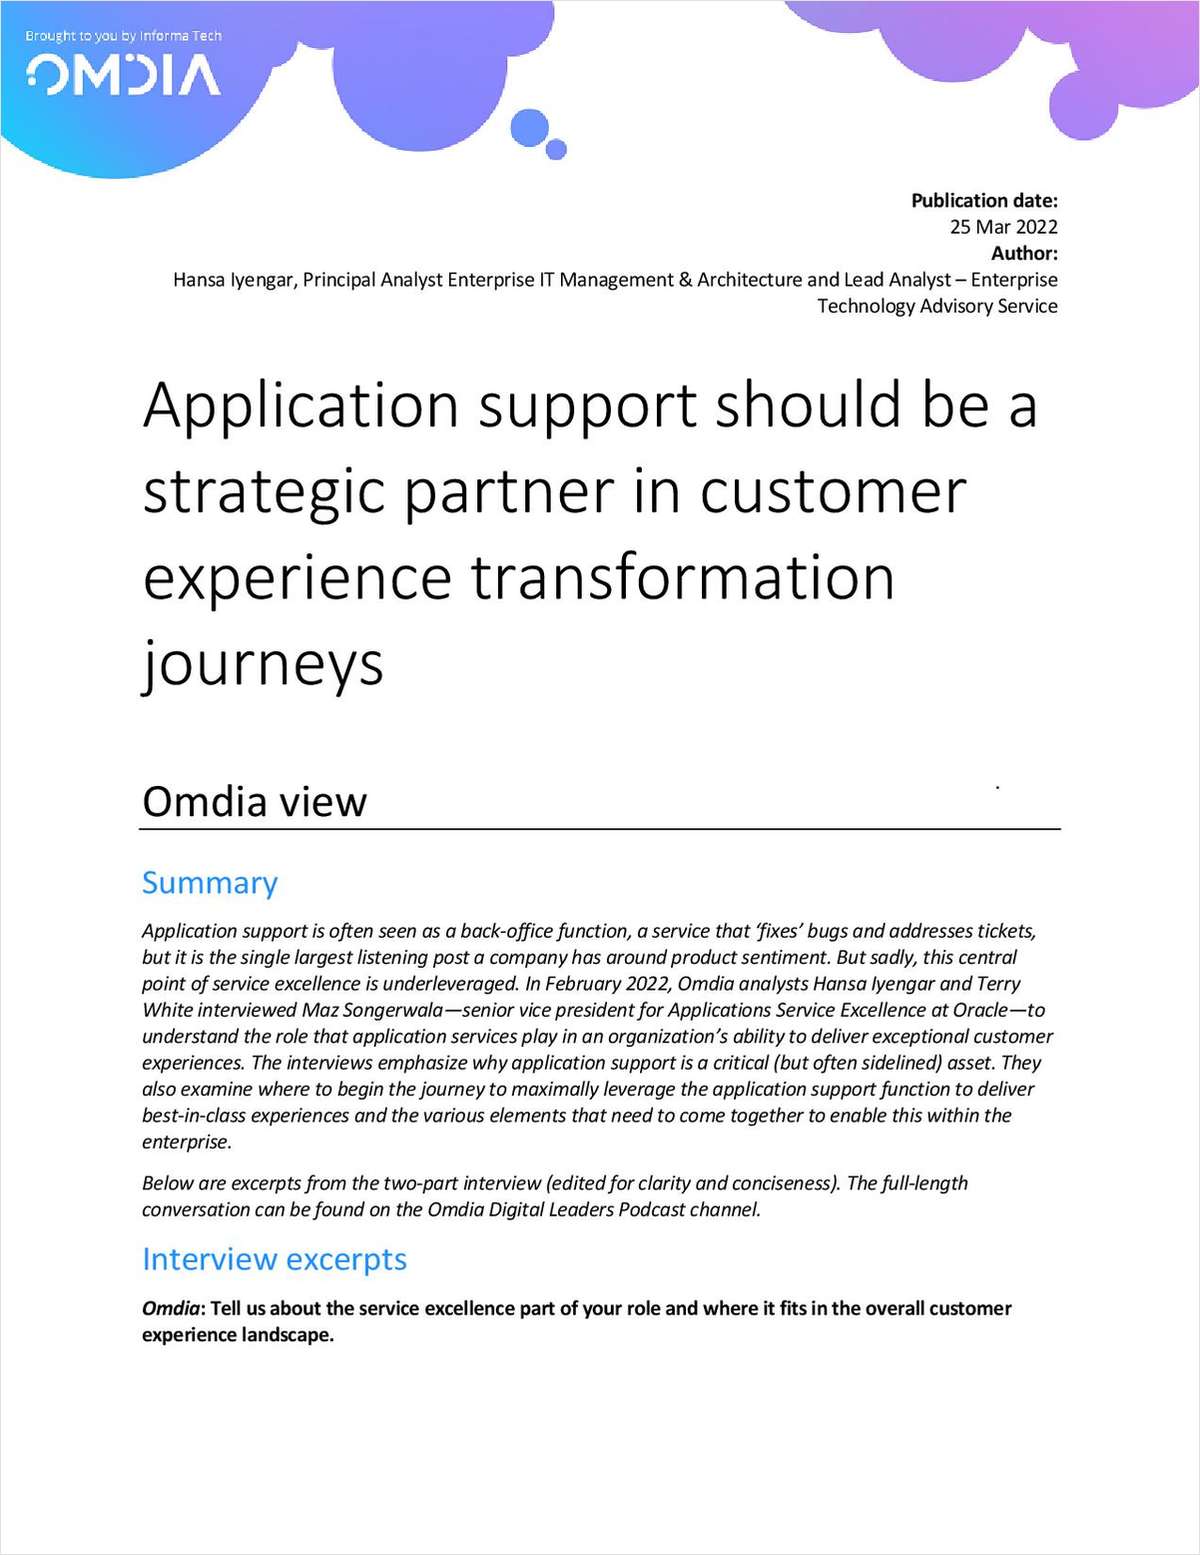 Application support should be a strategic partner in customer experience transformation journeys